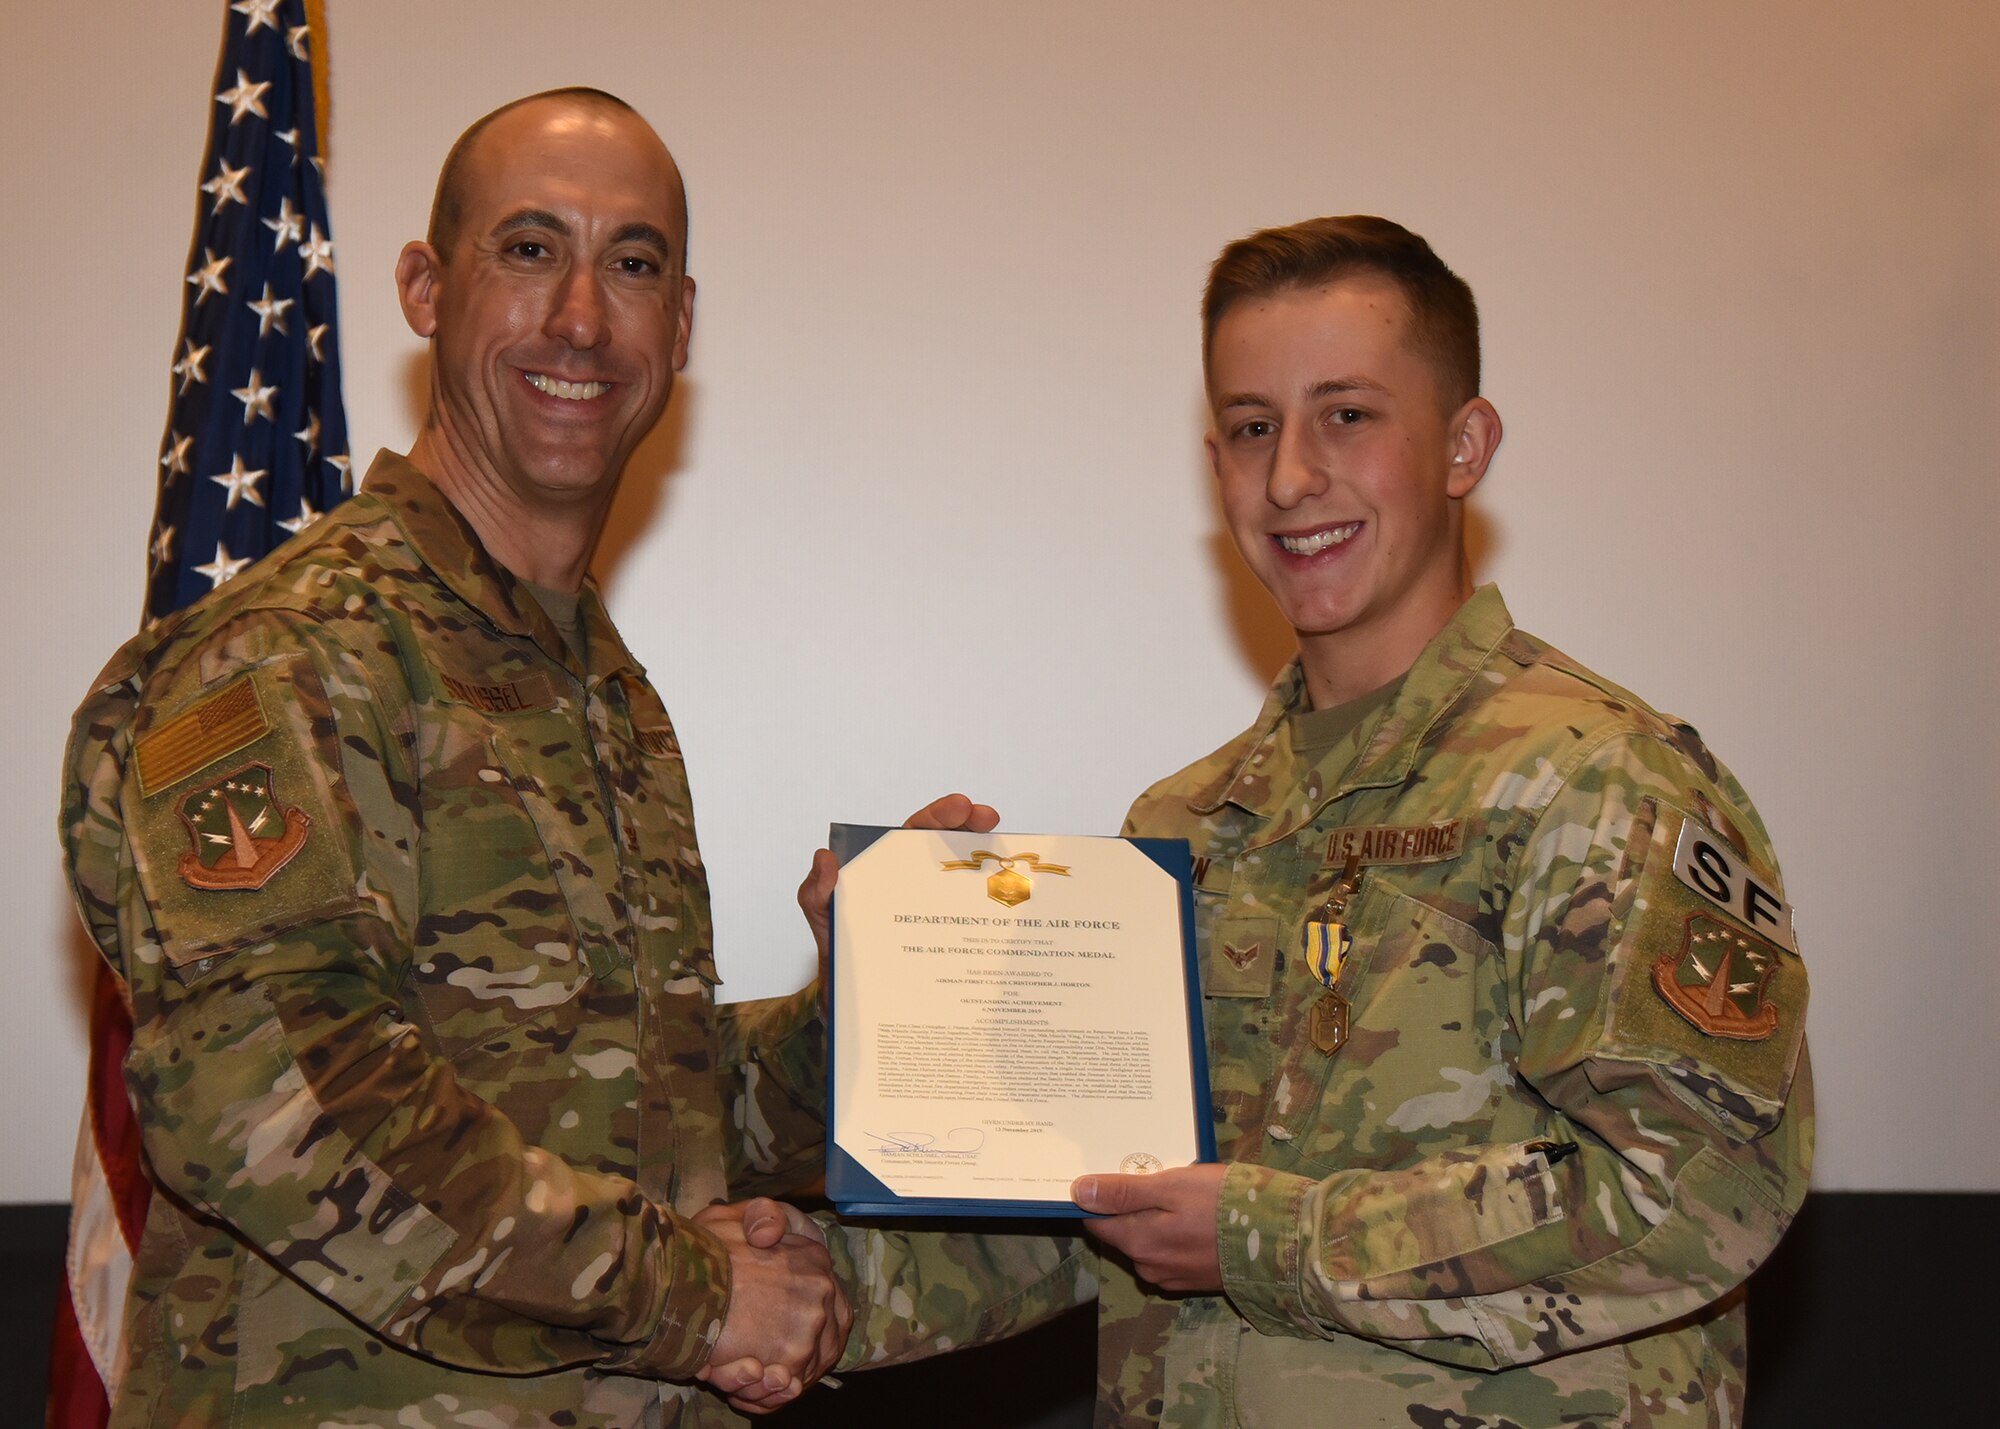 Airman 1st Class Christopher Horton, 790th MSFS Defender, receives an Air Force Commendation Award from 90th Security Forces Group Commander Col. Damian Schlussel during a ceremony Nov. 15, 2019, at the Base Theater on F. E. Warren Air Force Base, Wyo. Horton received the commendation for actions taken in rescuing a family in danger of a house fire Nov. 7 in Dix, Nebraska. Horton was recognized alongside his teammate, Airman 1st Class Christian Reid. (Air Force photo by Glenn S. Robertson)